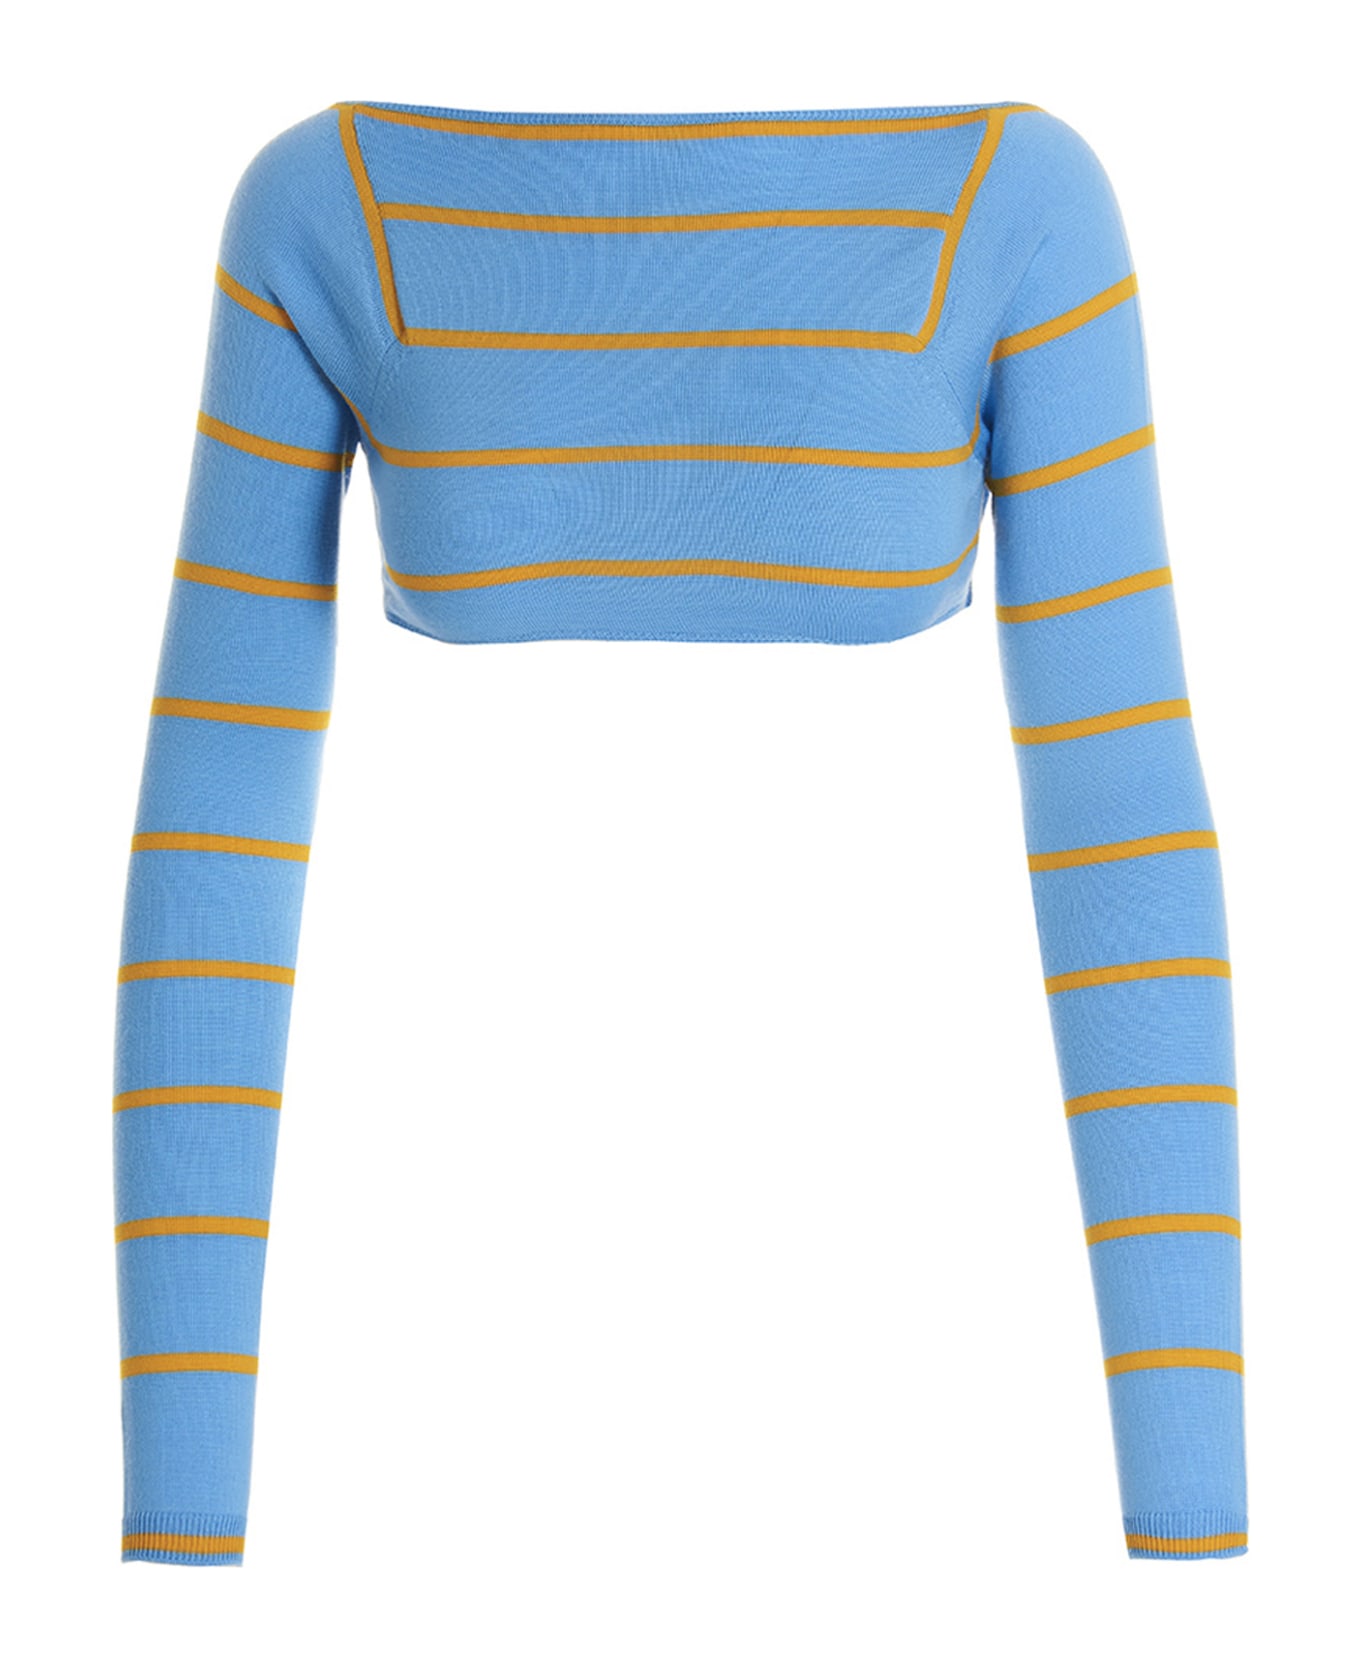 Pucci Cut-out Cropped Sweater - Light Blue ニットウェア